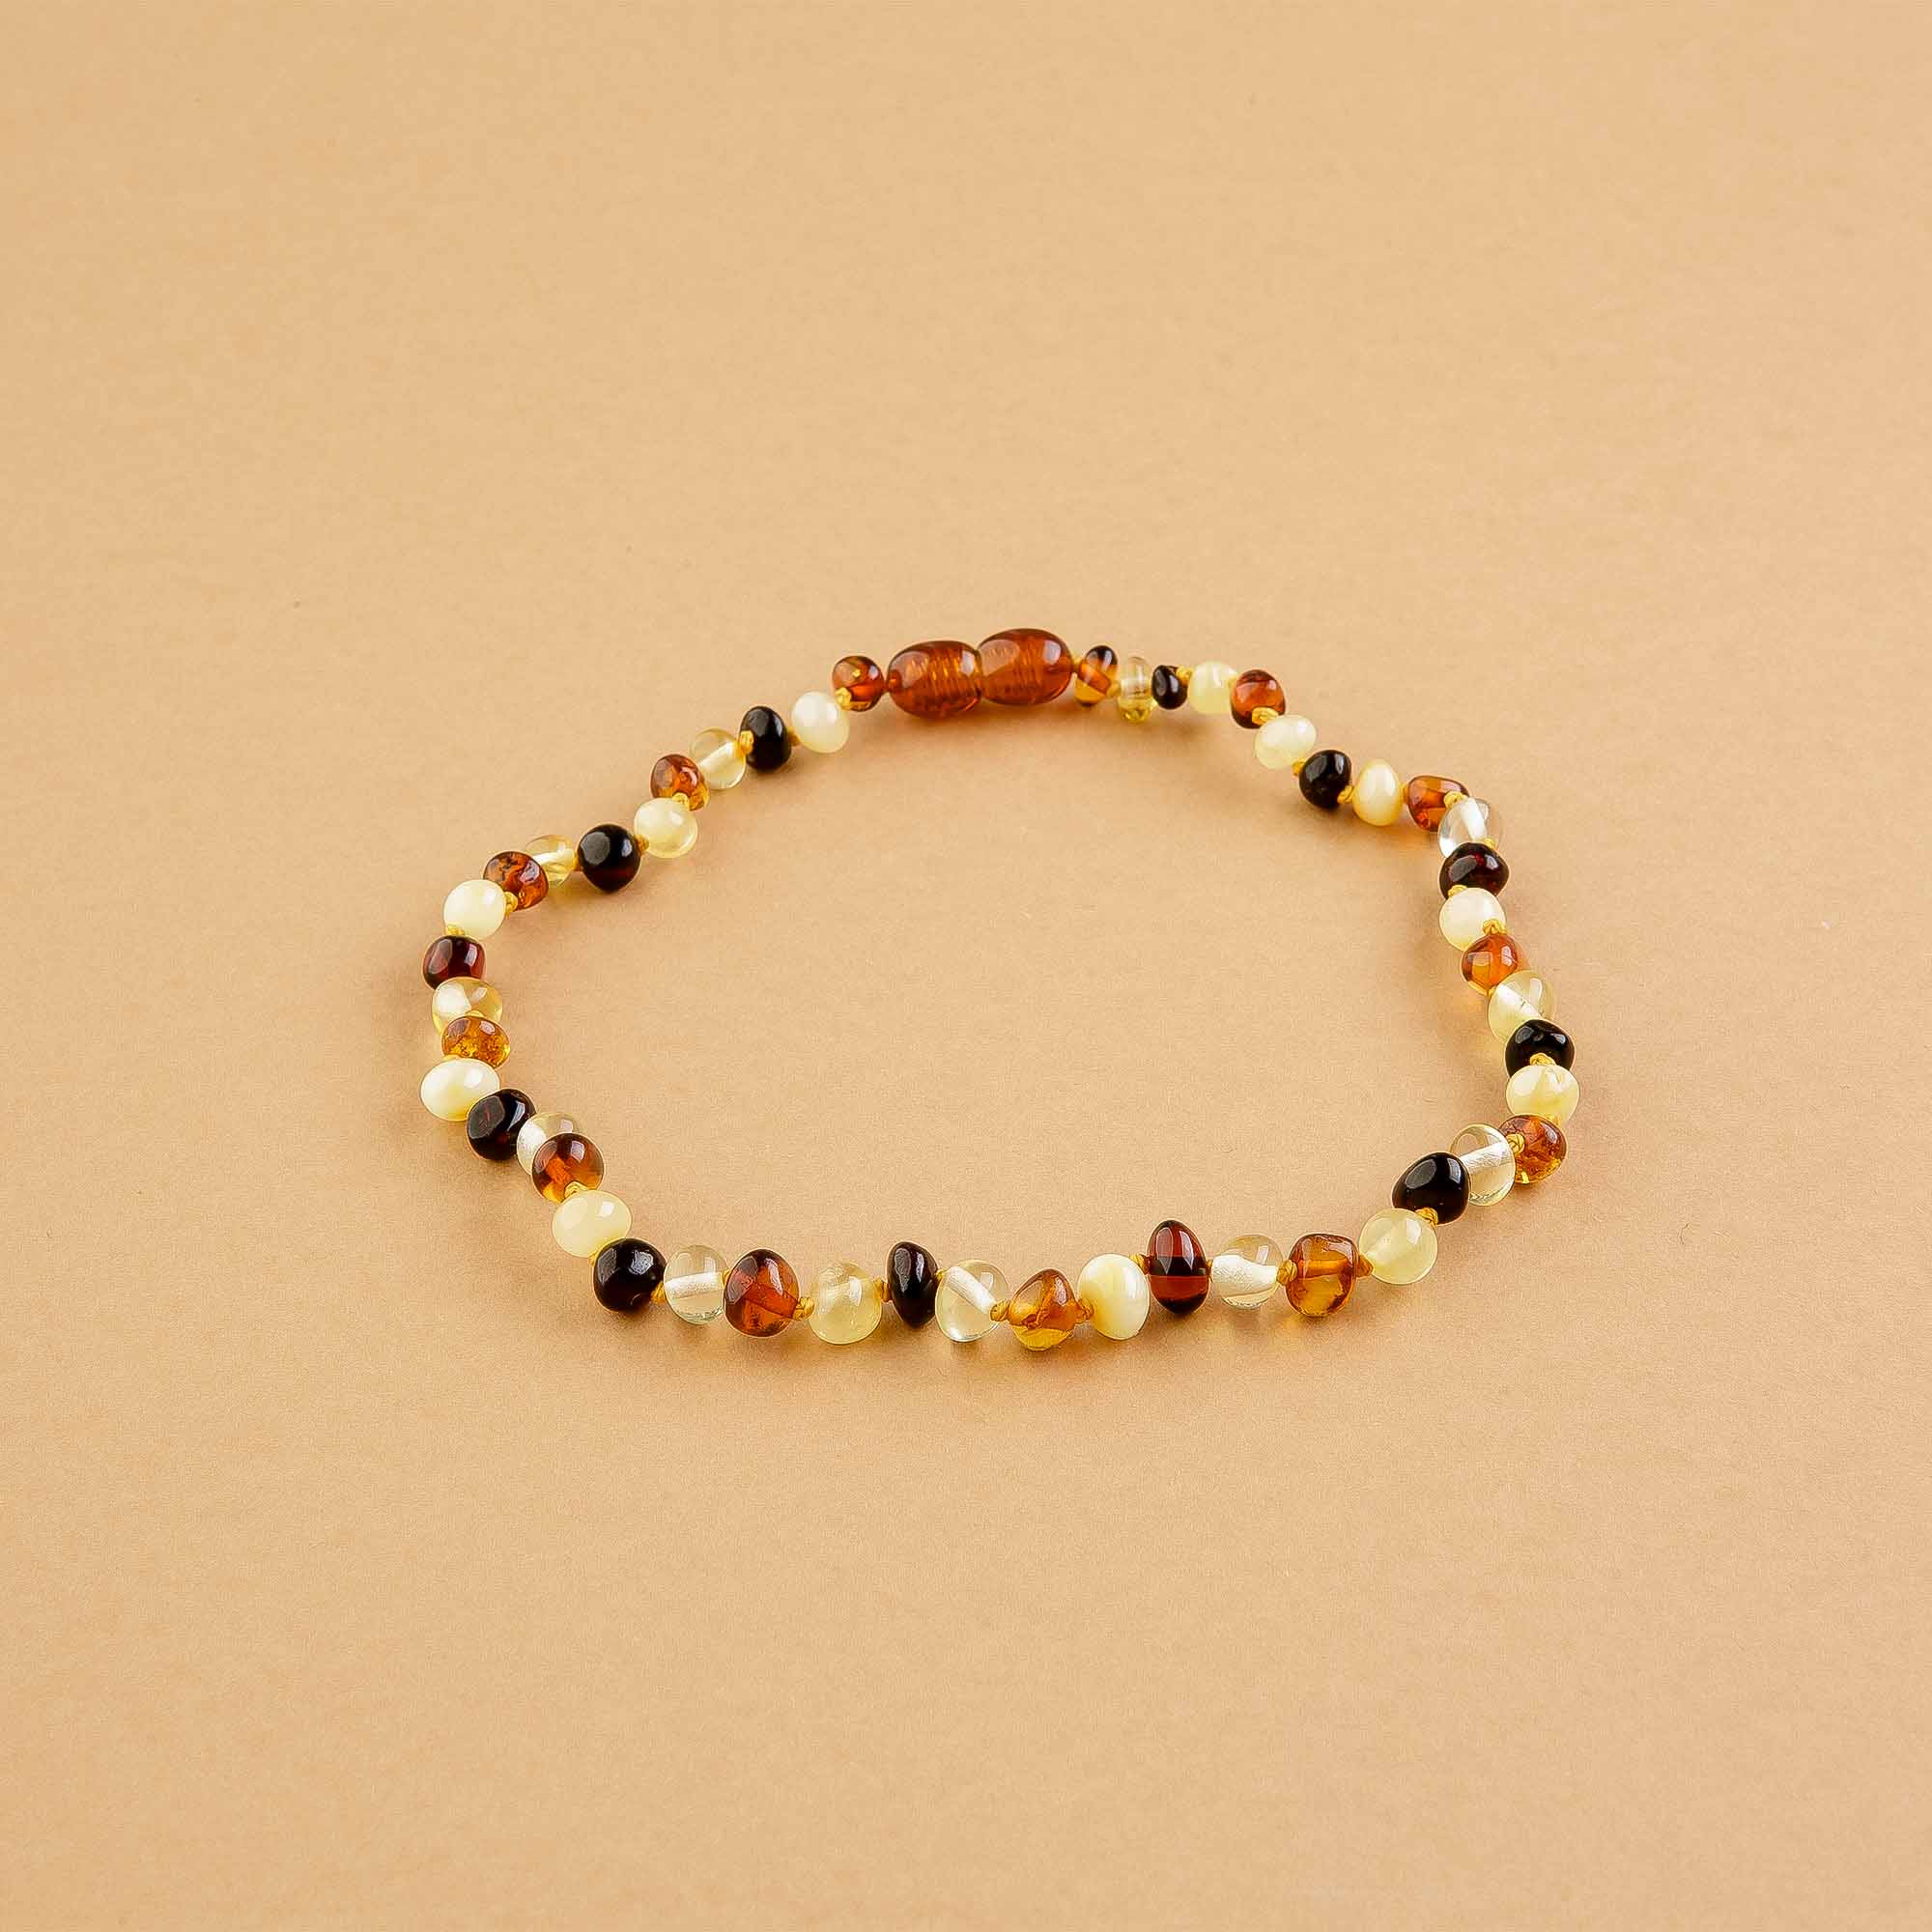 Necklace of Natural Baltic Amber Beads For Children